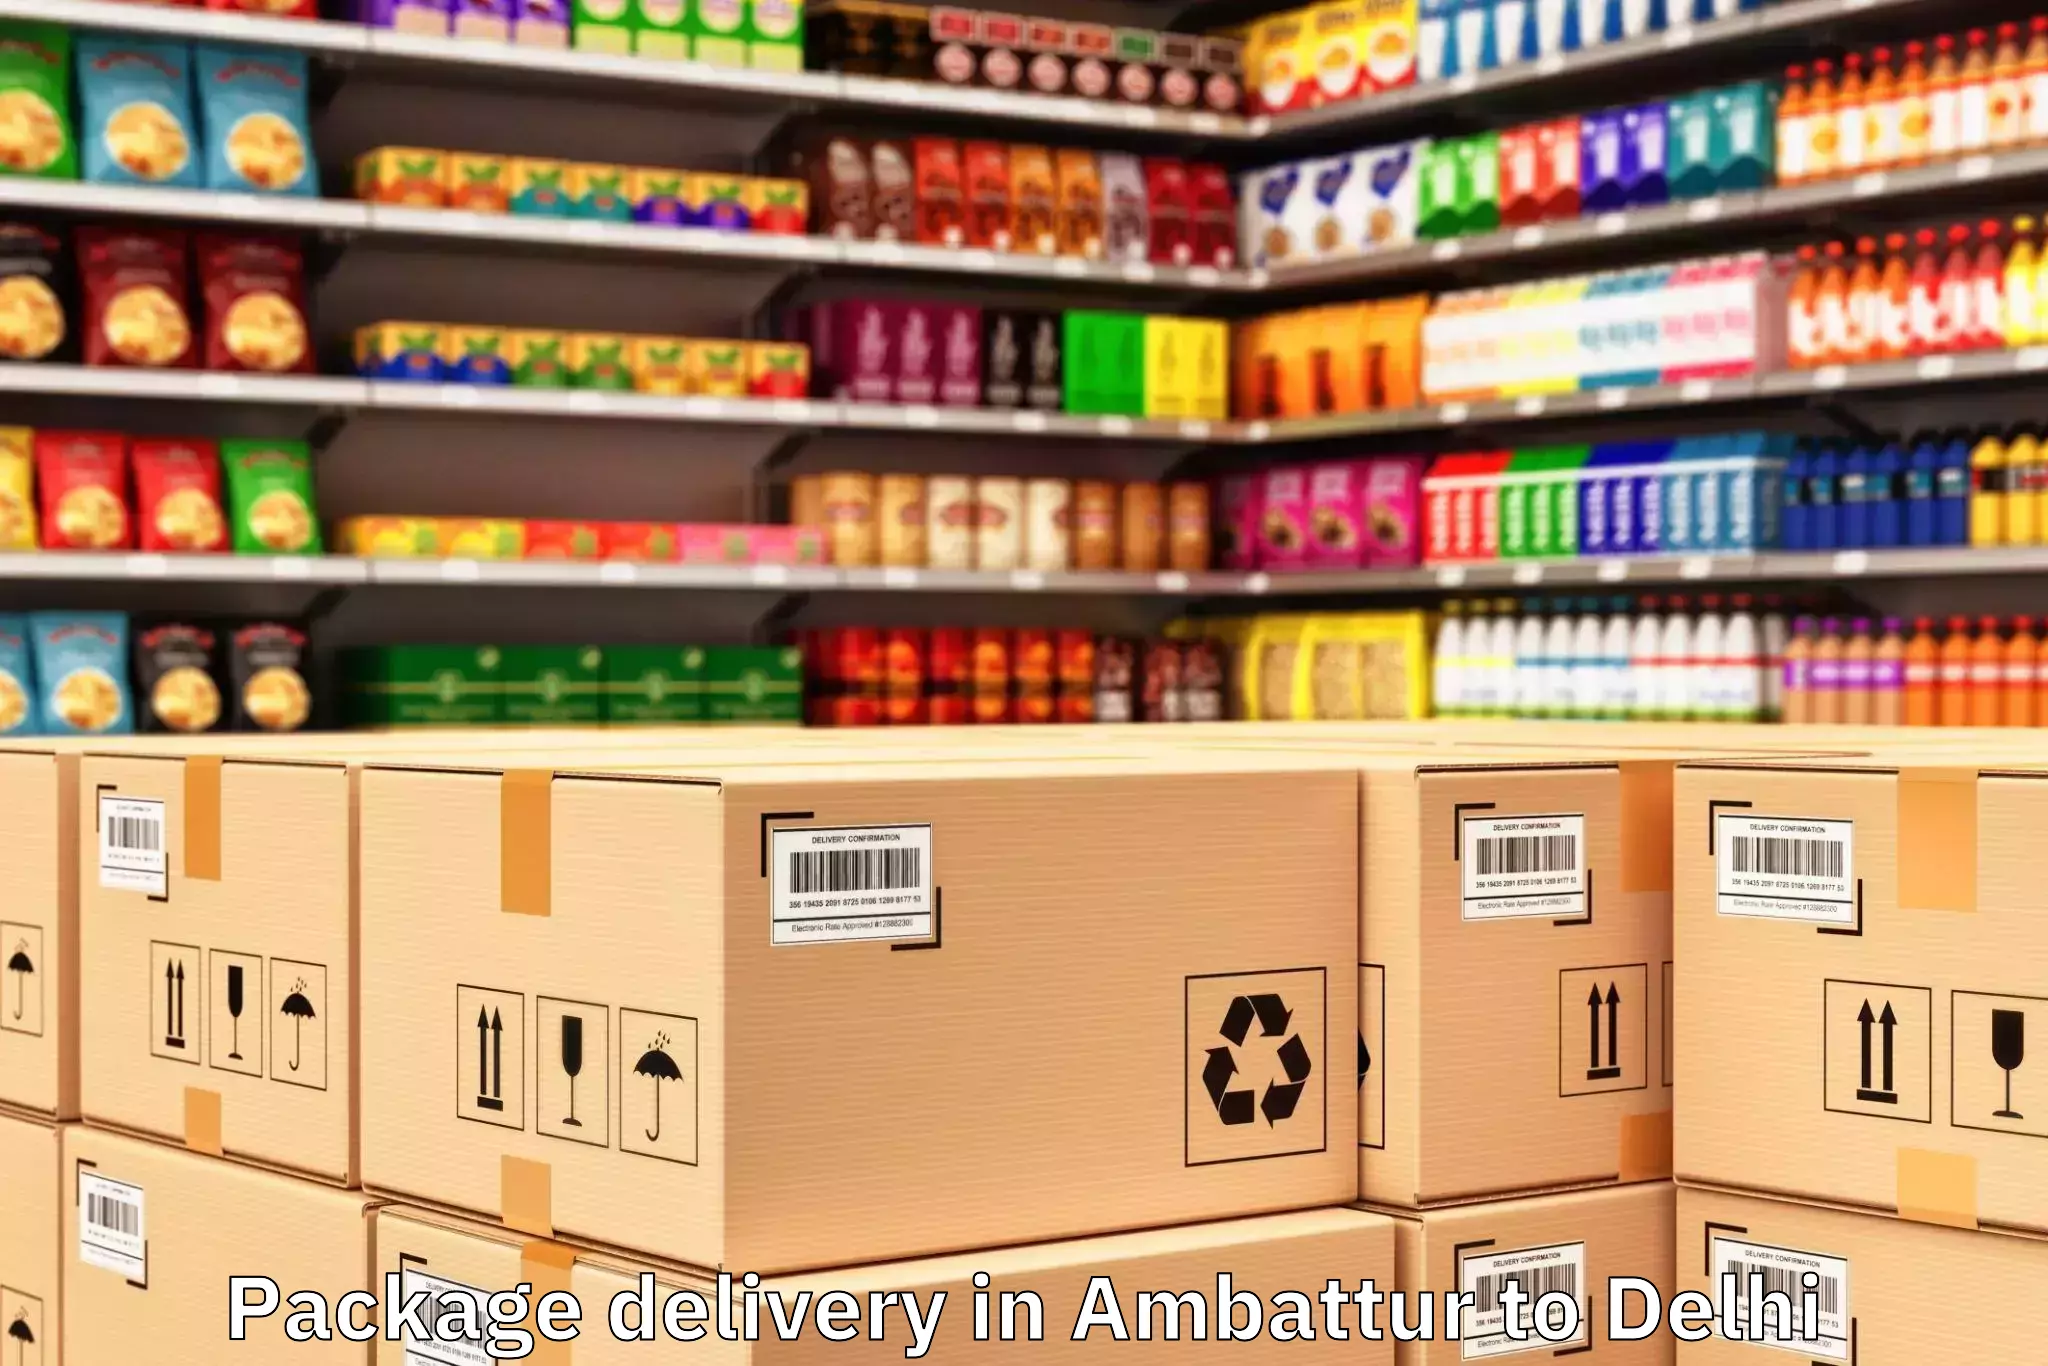 Quality Ambattur to Unity One Mall Janakpuri Package Delivery